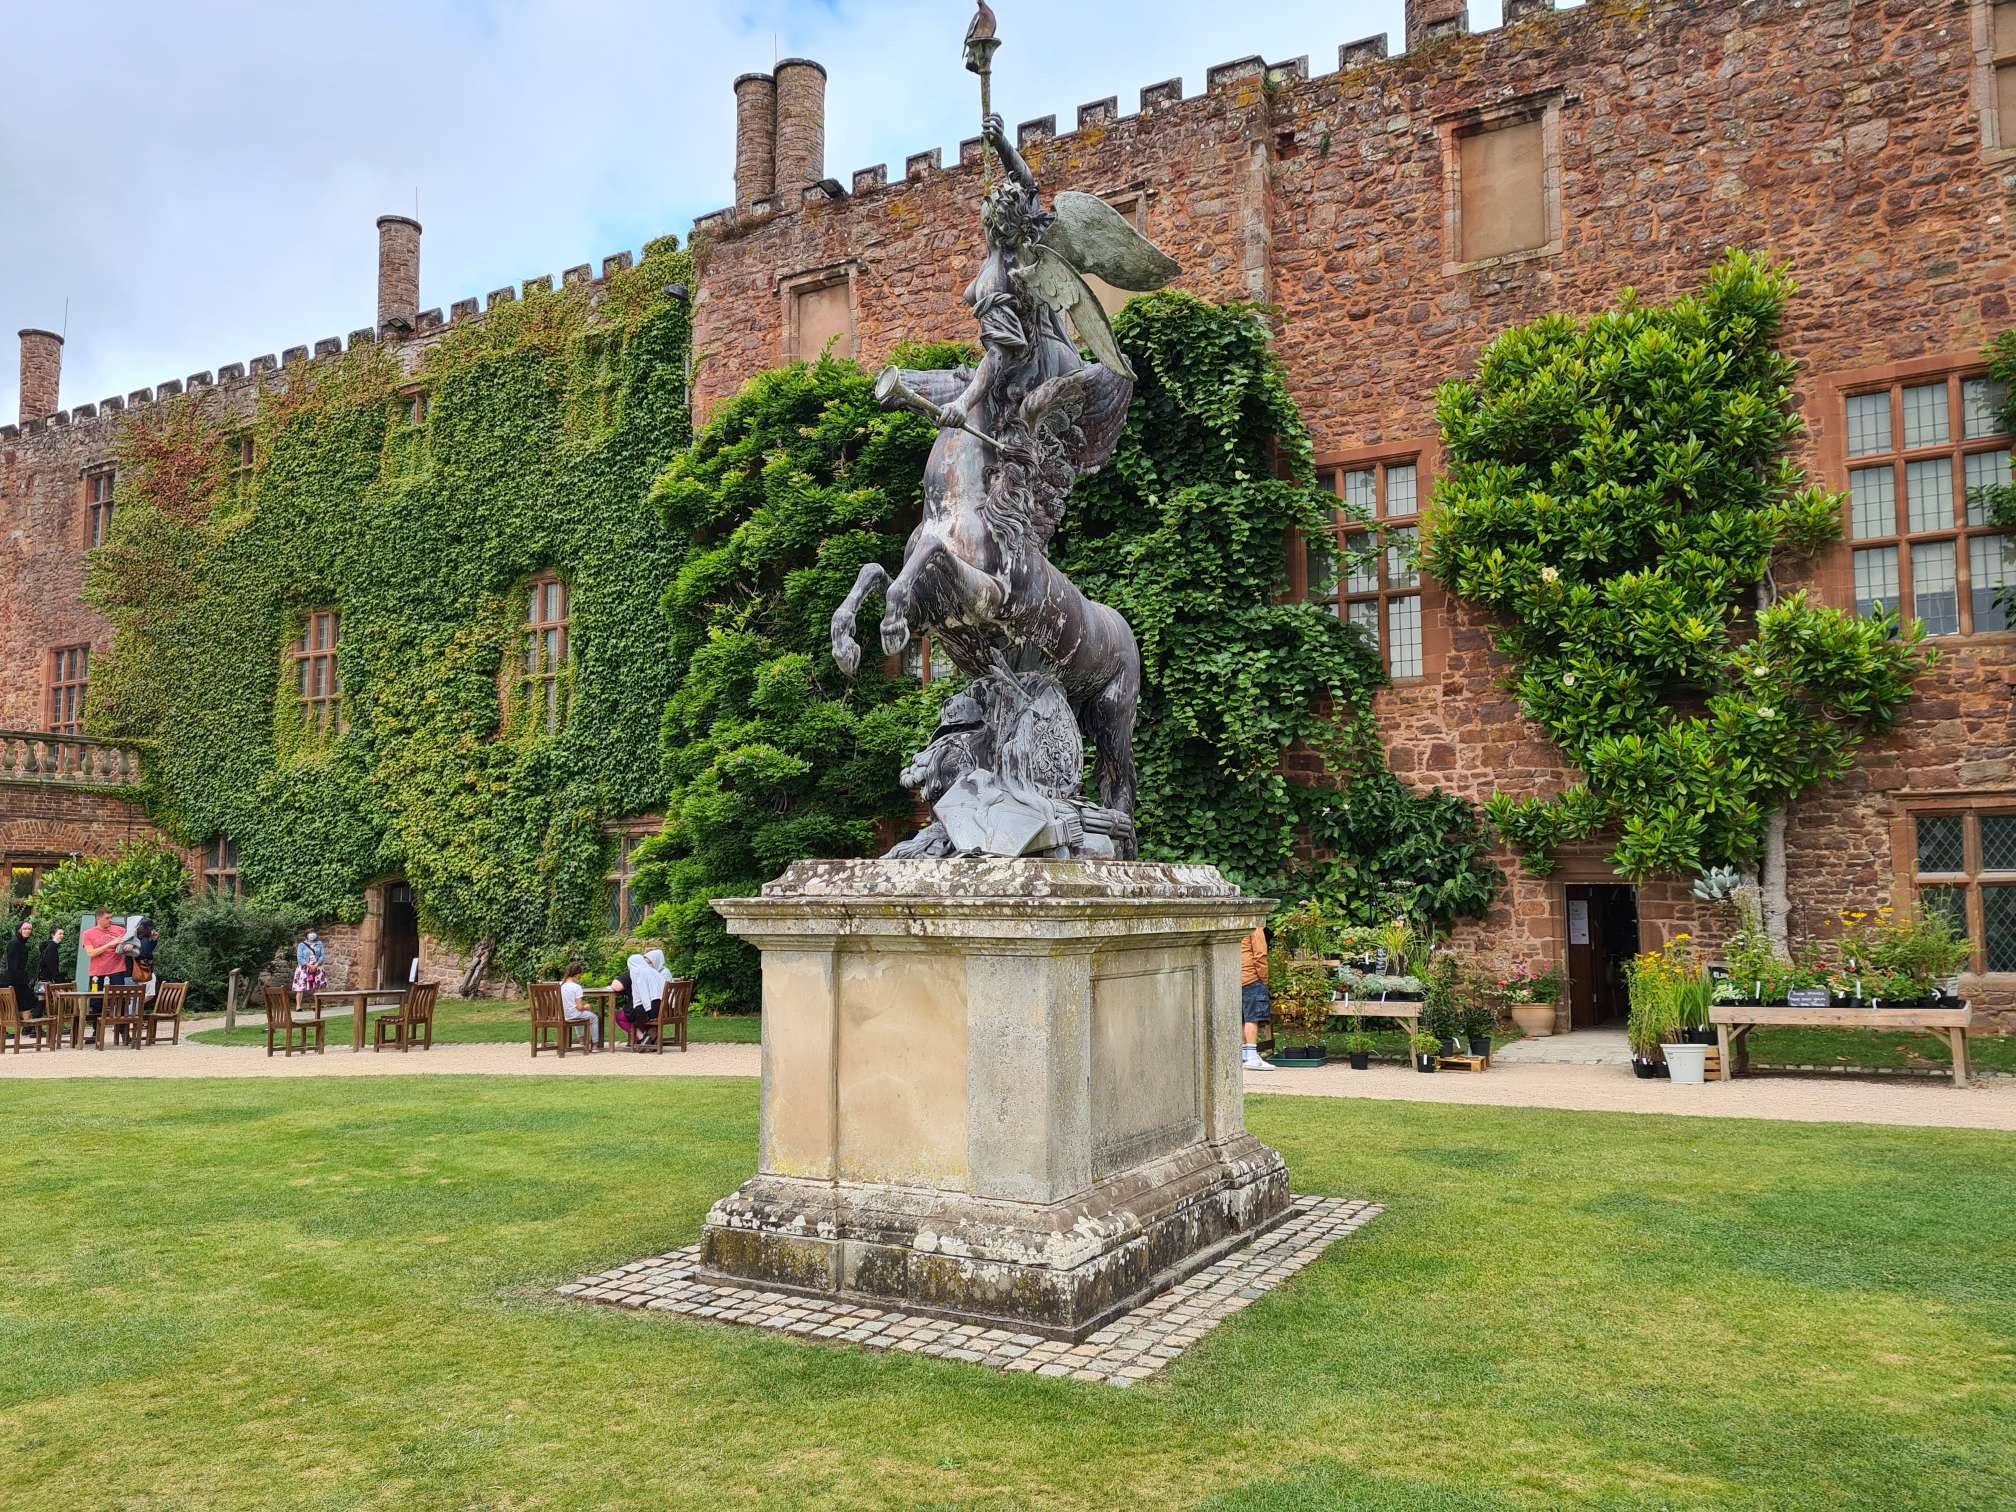 A statue in the courtyard of Powis Castle